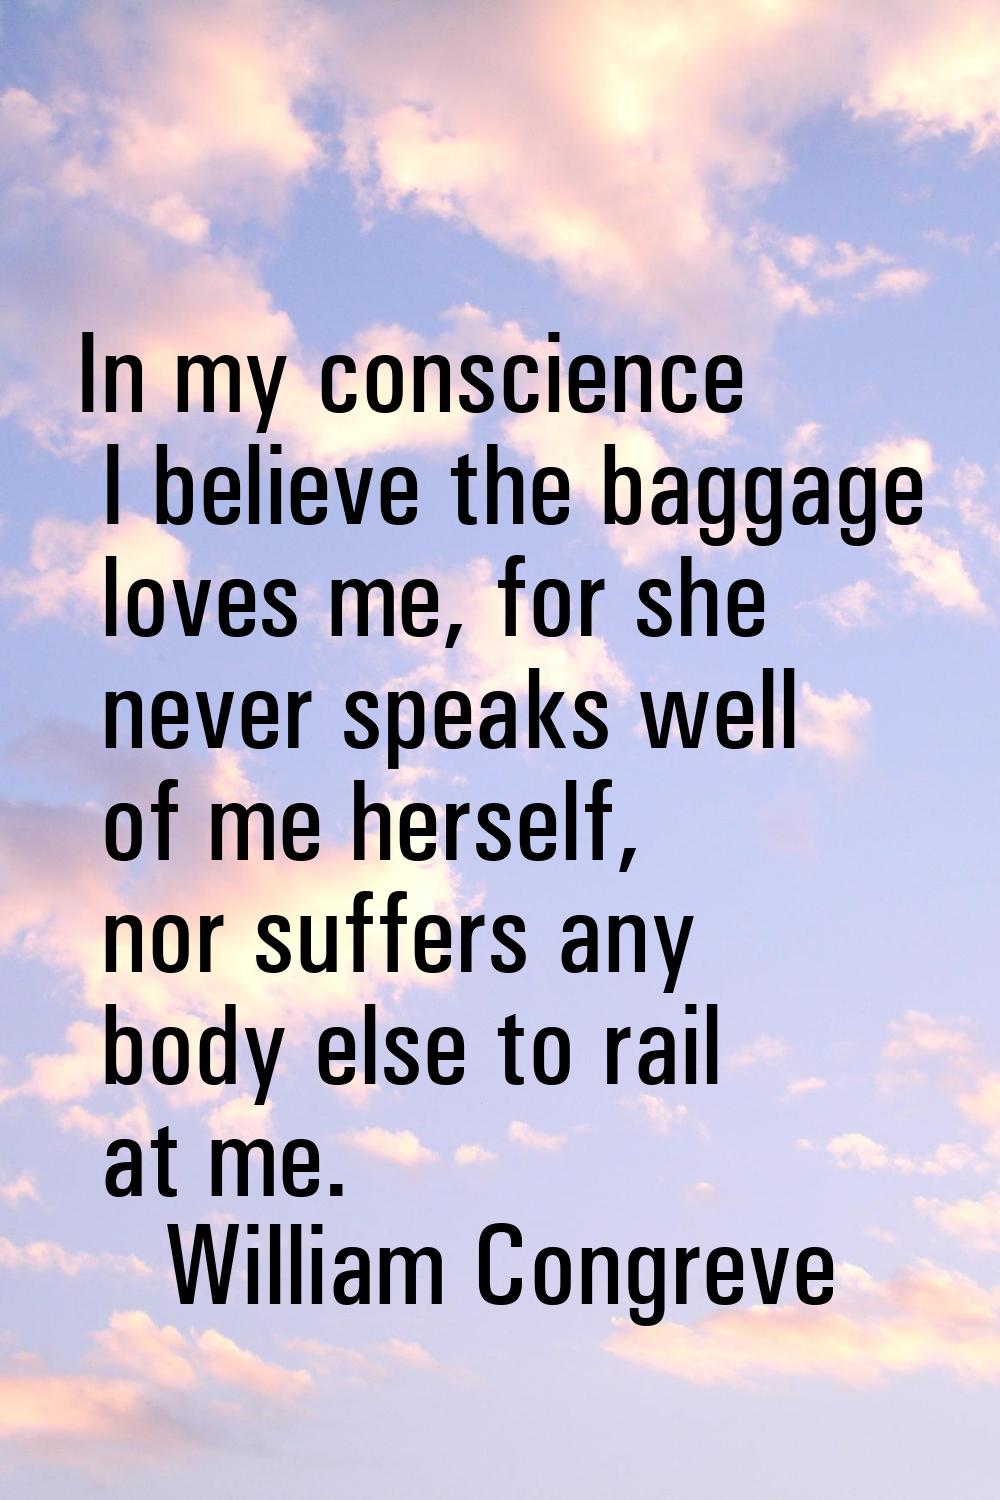 In my conscience I believe the baggage loves me, for she never speaks well of me herself, nor suffe